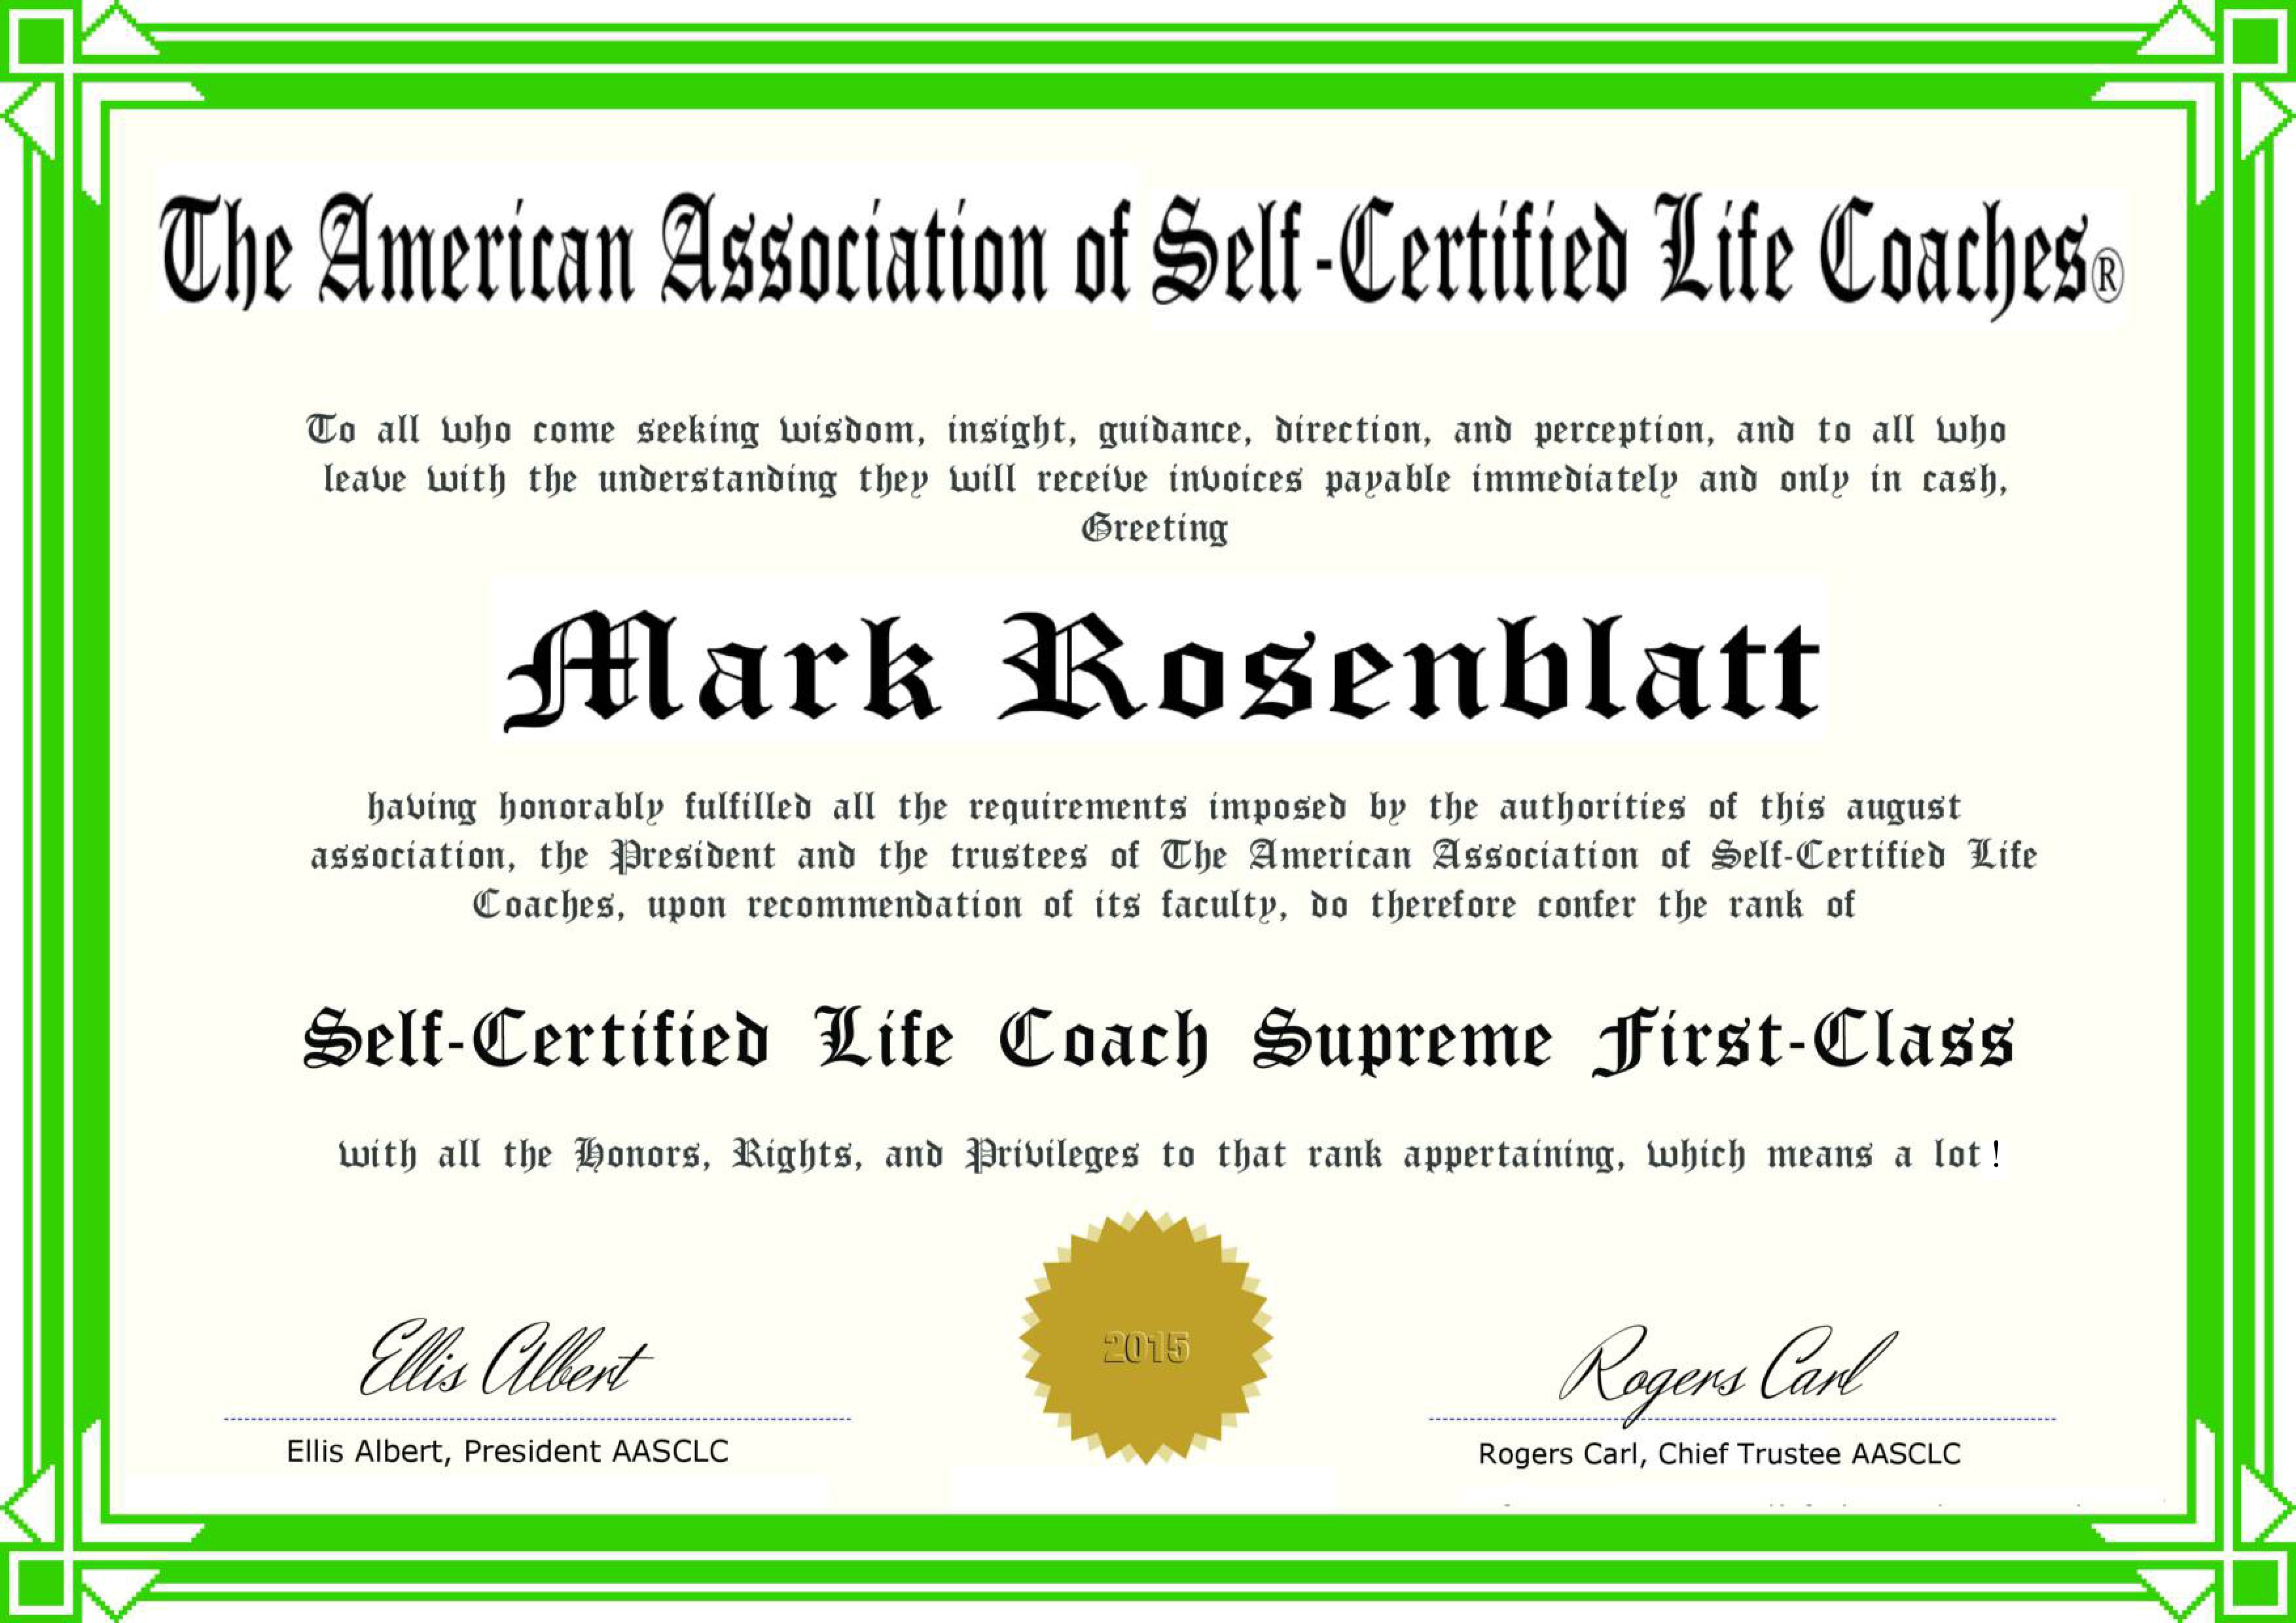 Certification As A Self-Certified Life Coach By The American Association Of Self-Certified Life Coaches